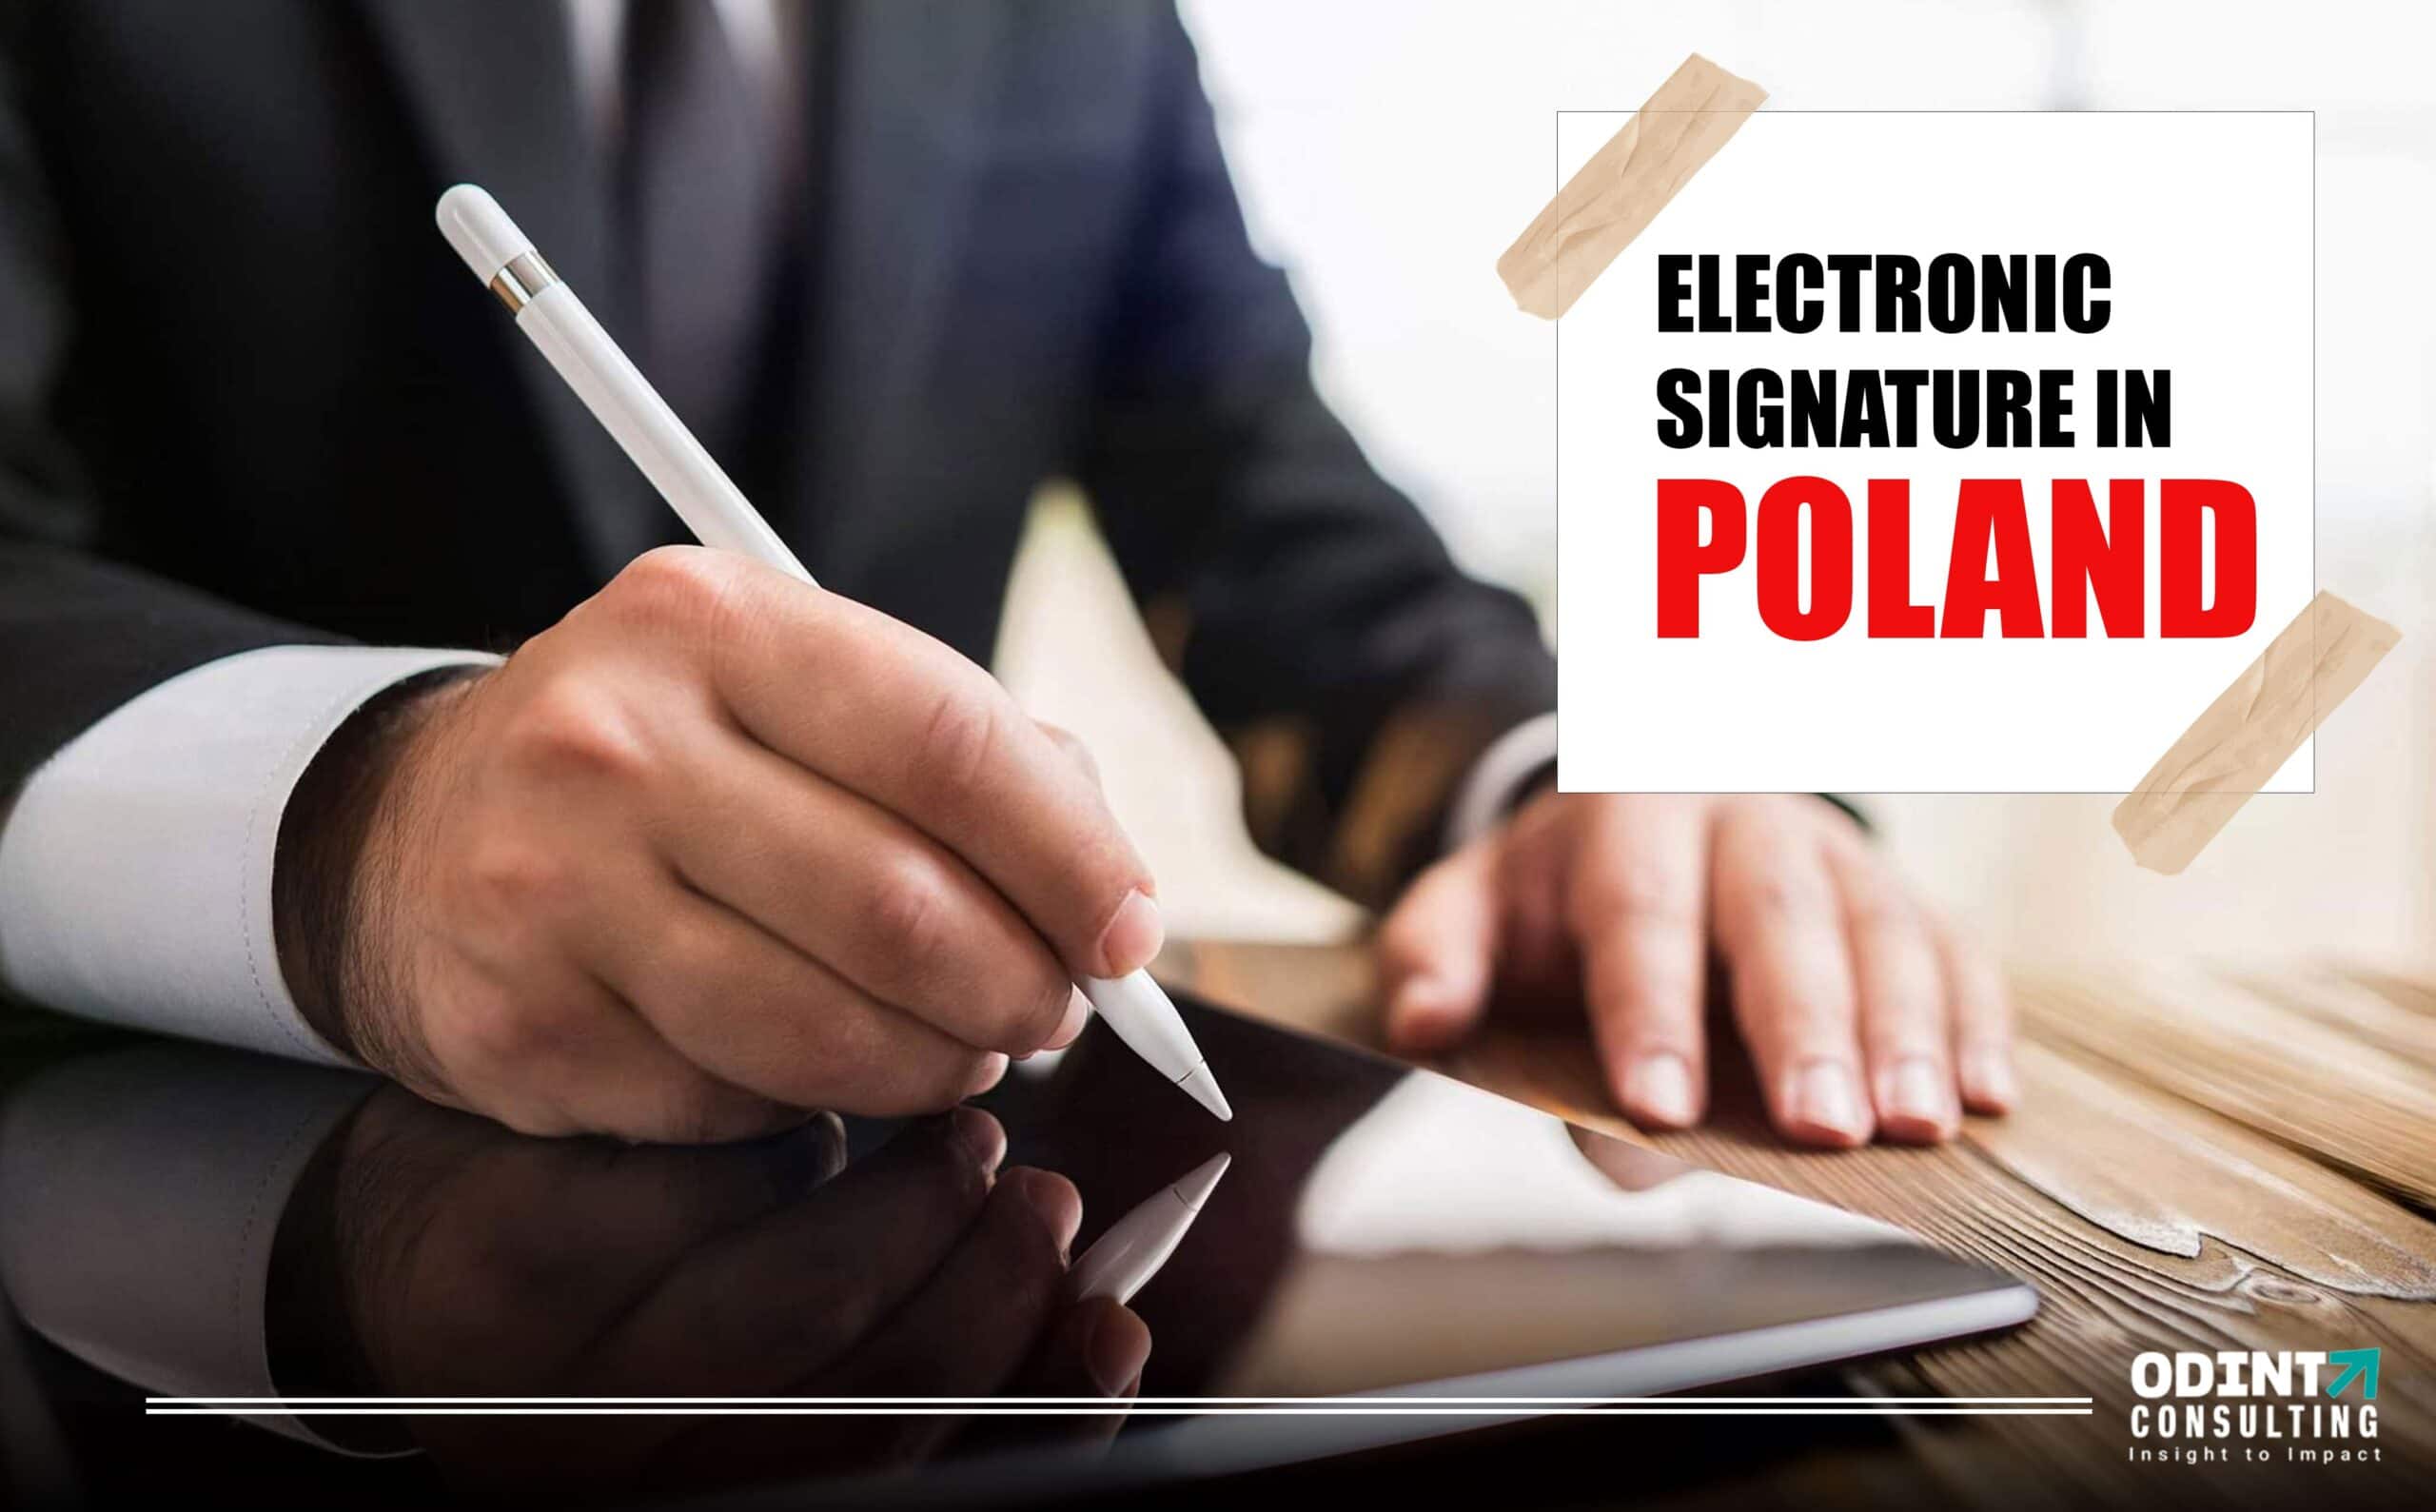 Electronic Signature in Poland 2022: Uses, Types & Local Technology Standards